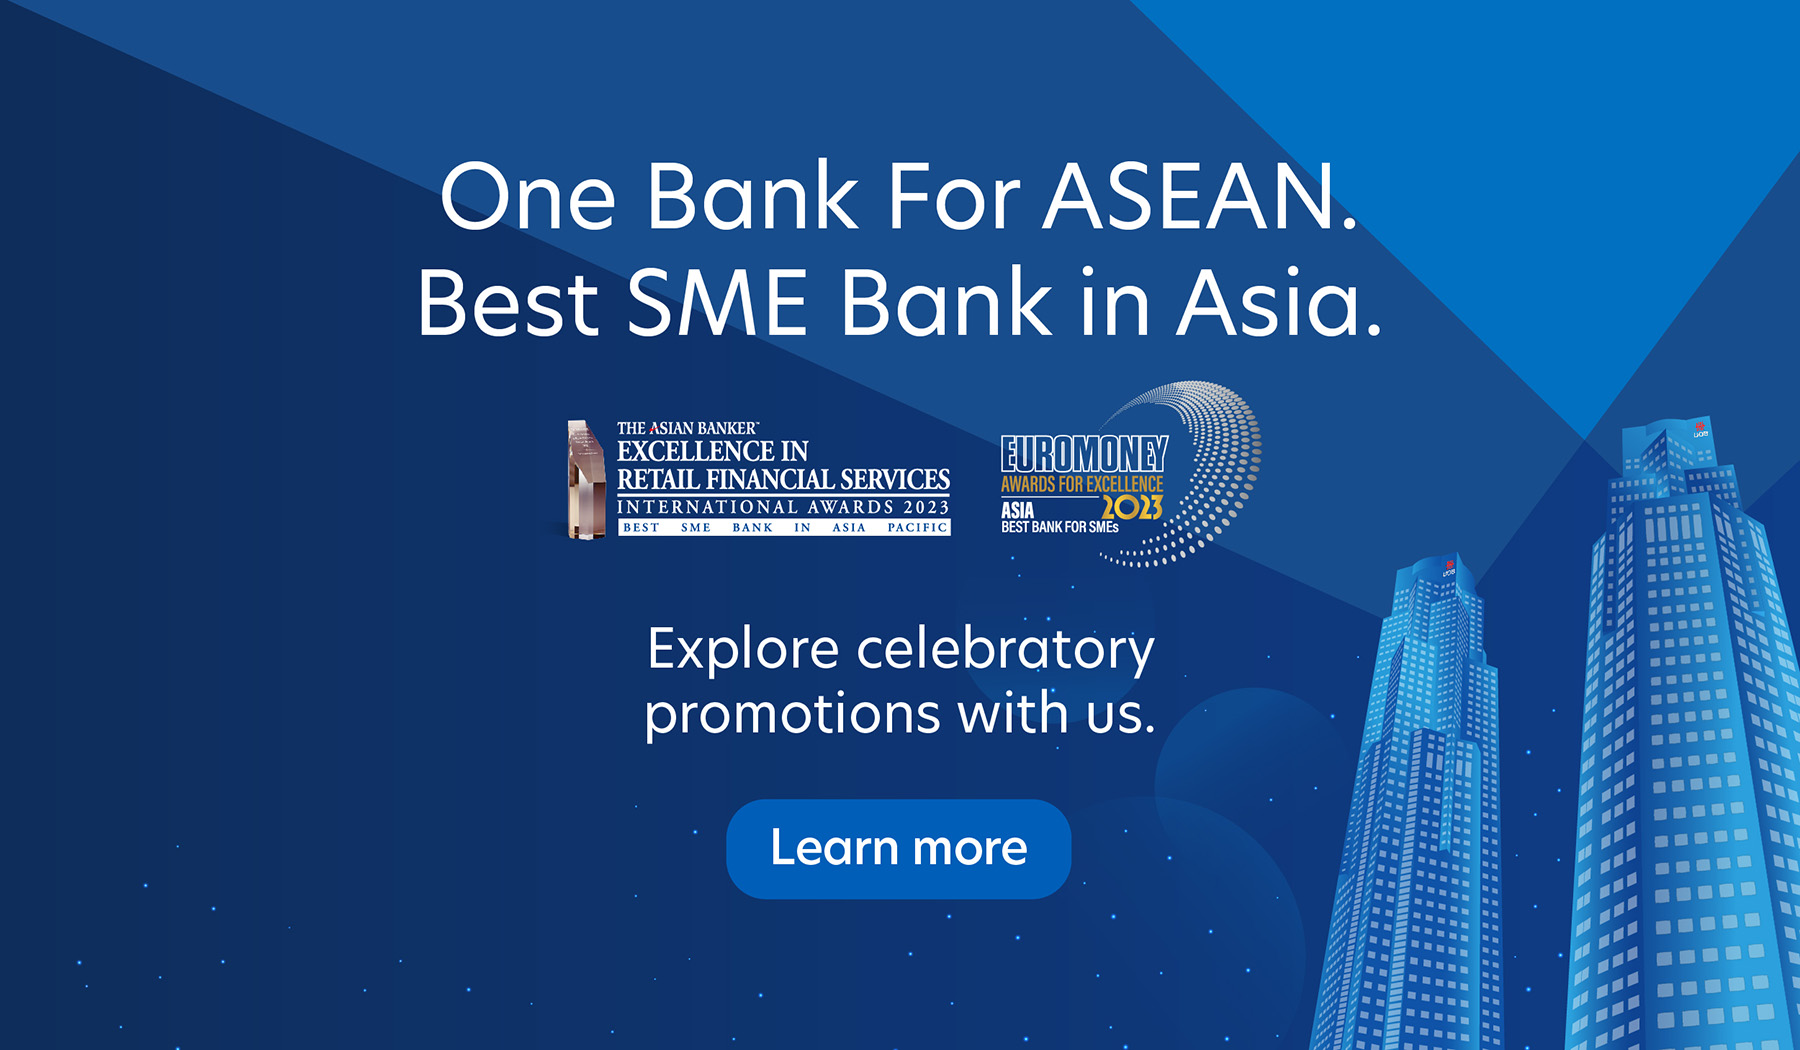 One Bank For ASEAN. Best SME Bank in Asia.